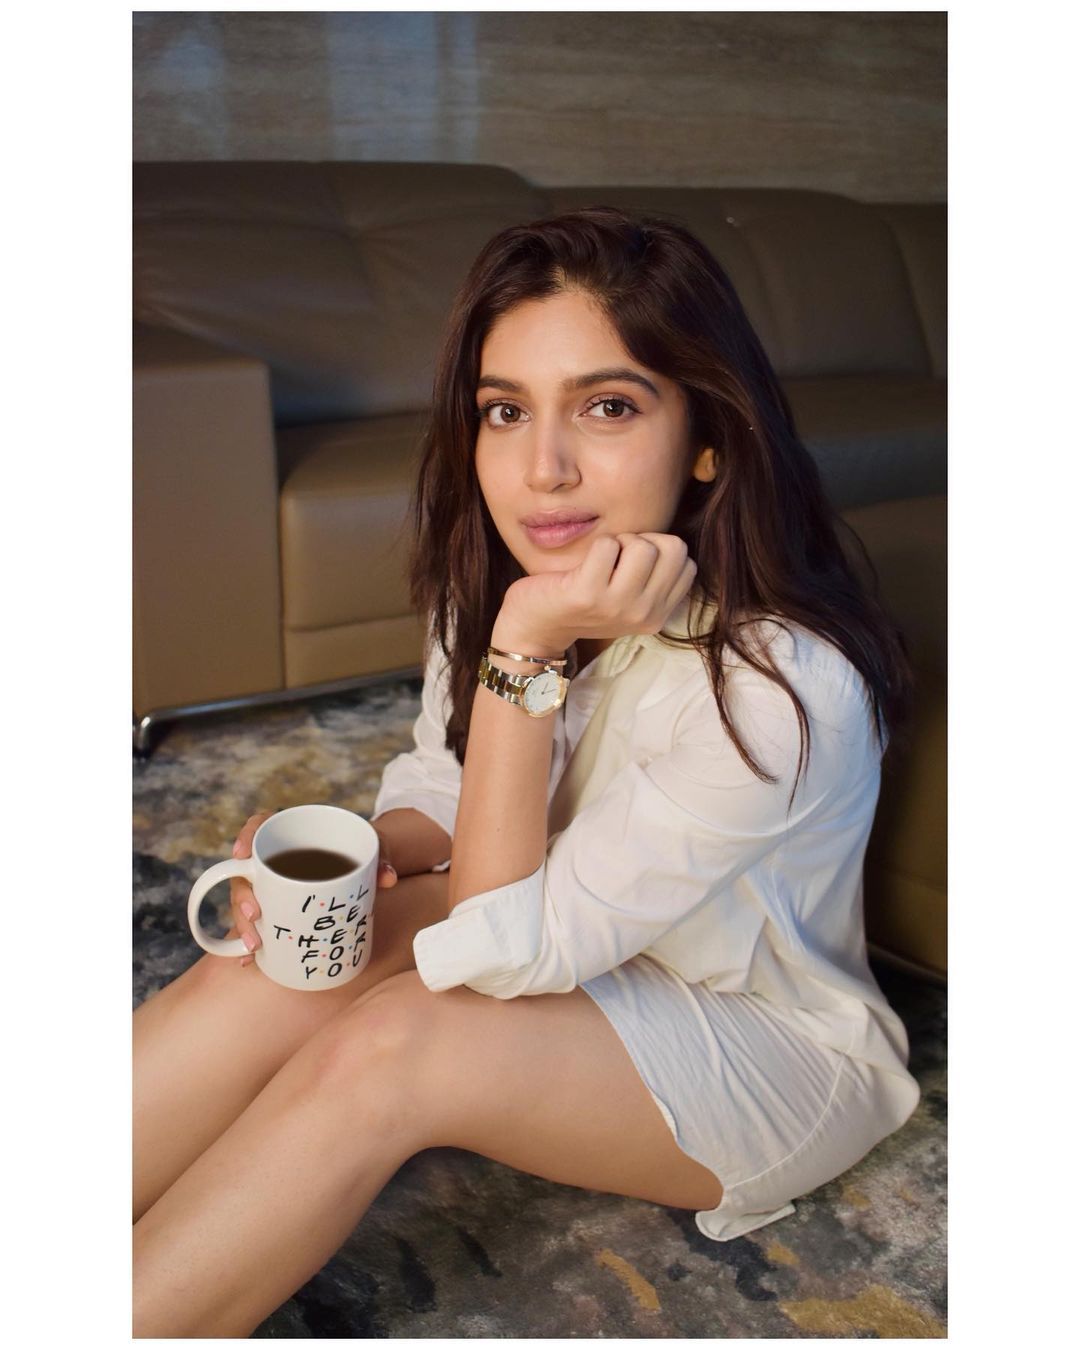 Bhumi Pednekar Recalls Being Paid Just 5 Percent Of Her Male Co-Star's Salary For A Film: After That I Didn't Succumb To It